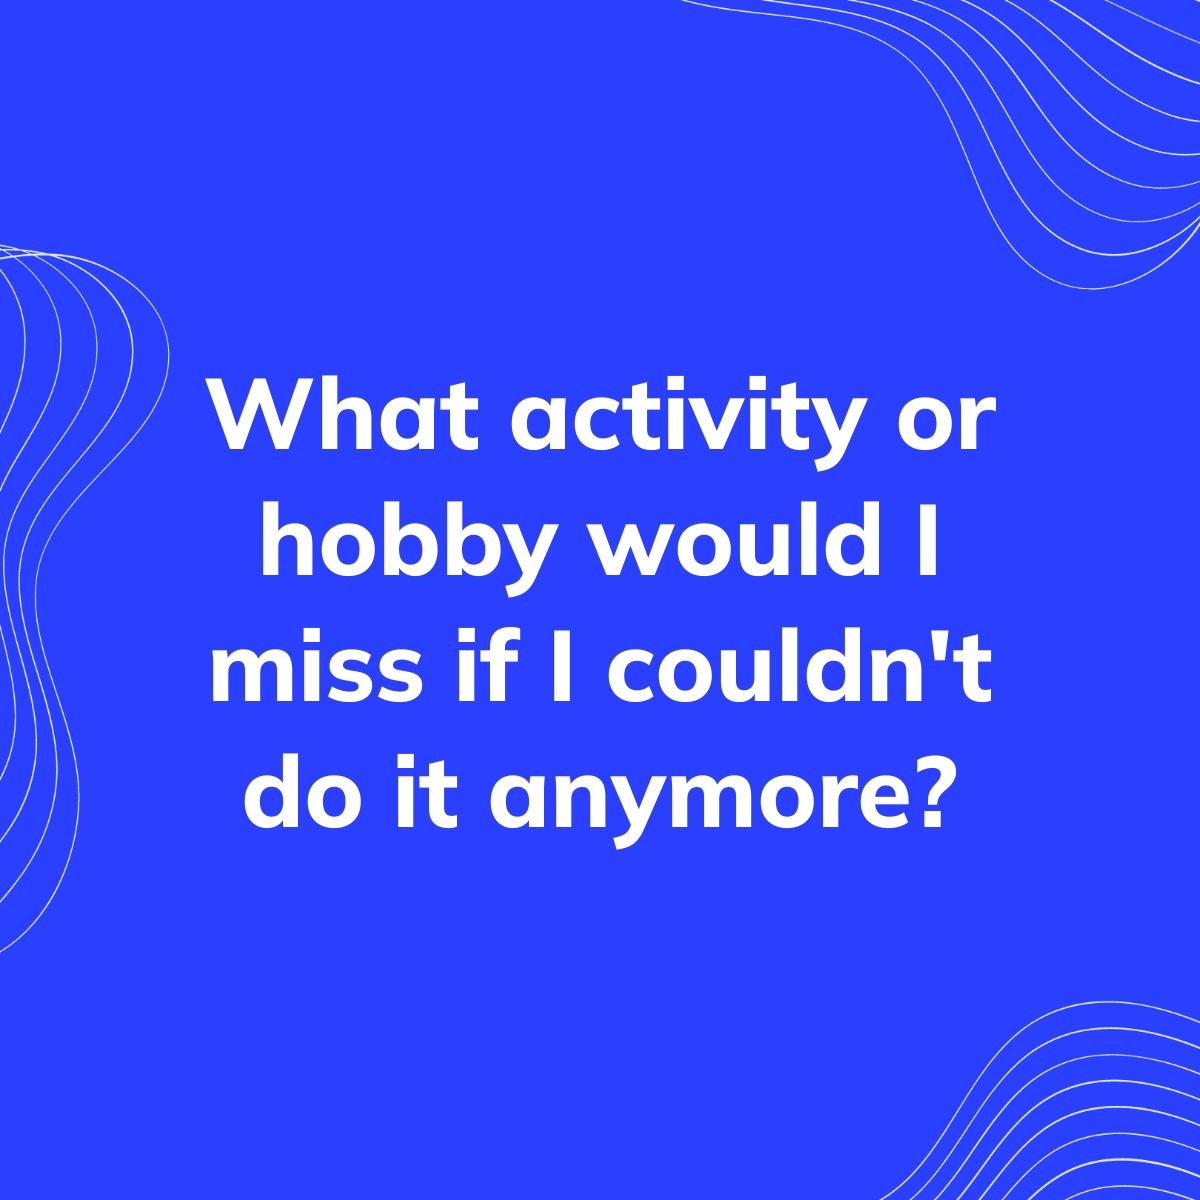 Journal Prompt: What activity or hobby would I miss if I couldn't do it anymore?